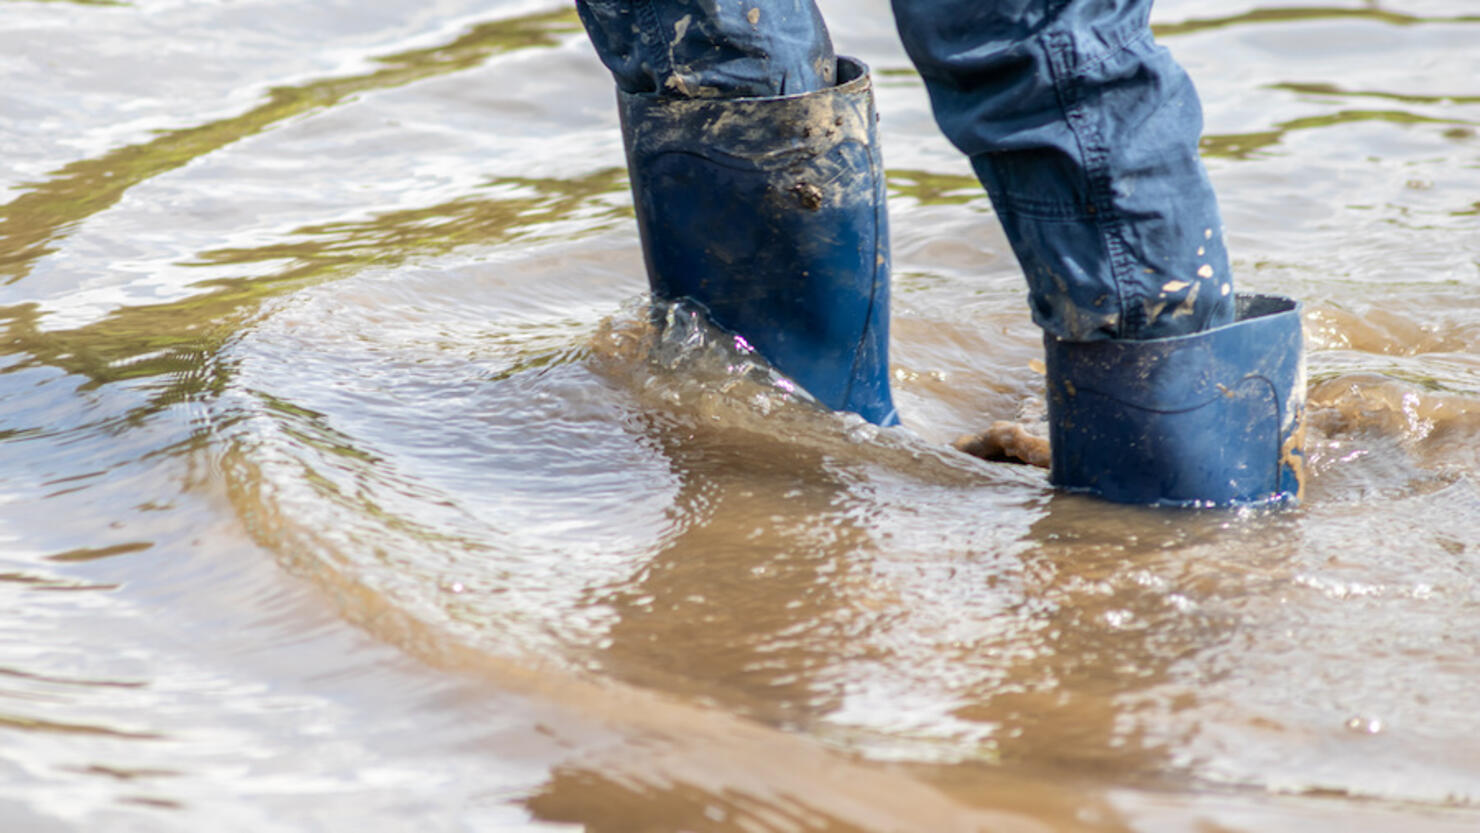 Young Boy Wading Through High Tide With Blue Gumboots After A Flood Has Broken The Protecting Dike